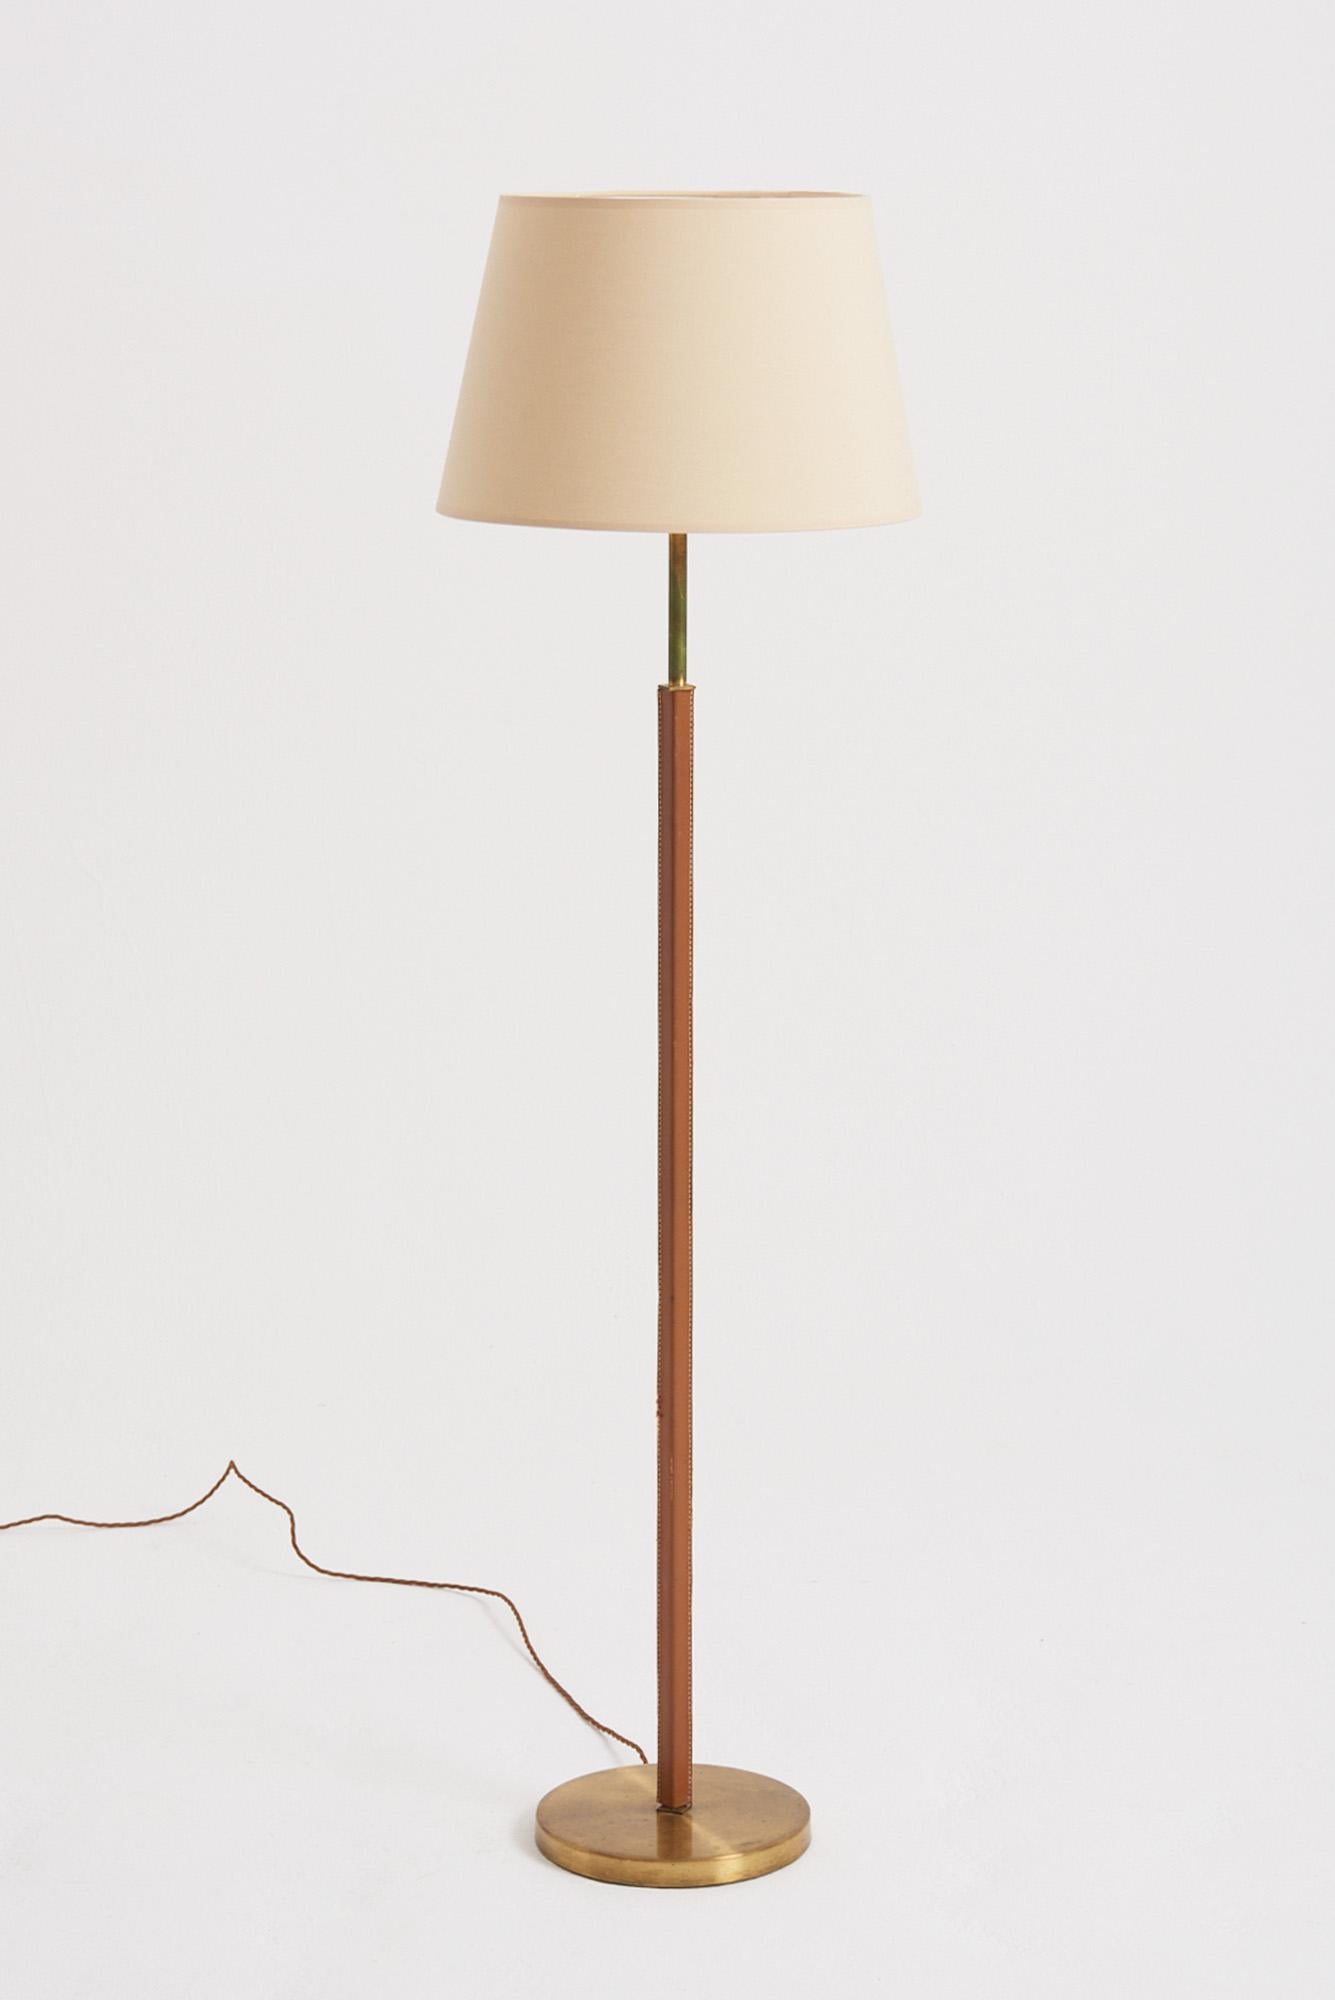 A brass and faux brown leather floor lamp by by Falkenbergs Belysning.
Sweden, third quarter of the 20th Century
With the shade: 145 cm high by 40 cm diameter
Lamp base only: 125 cm high by 25 cm diameter